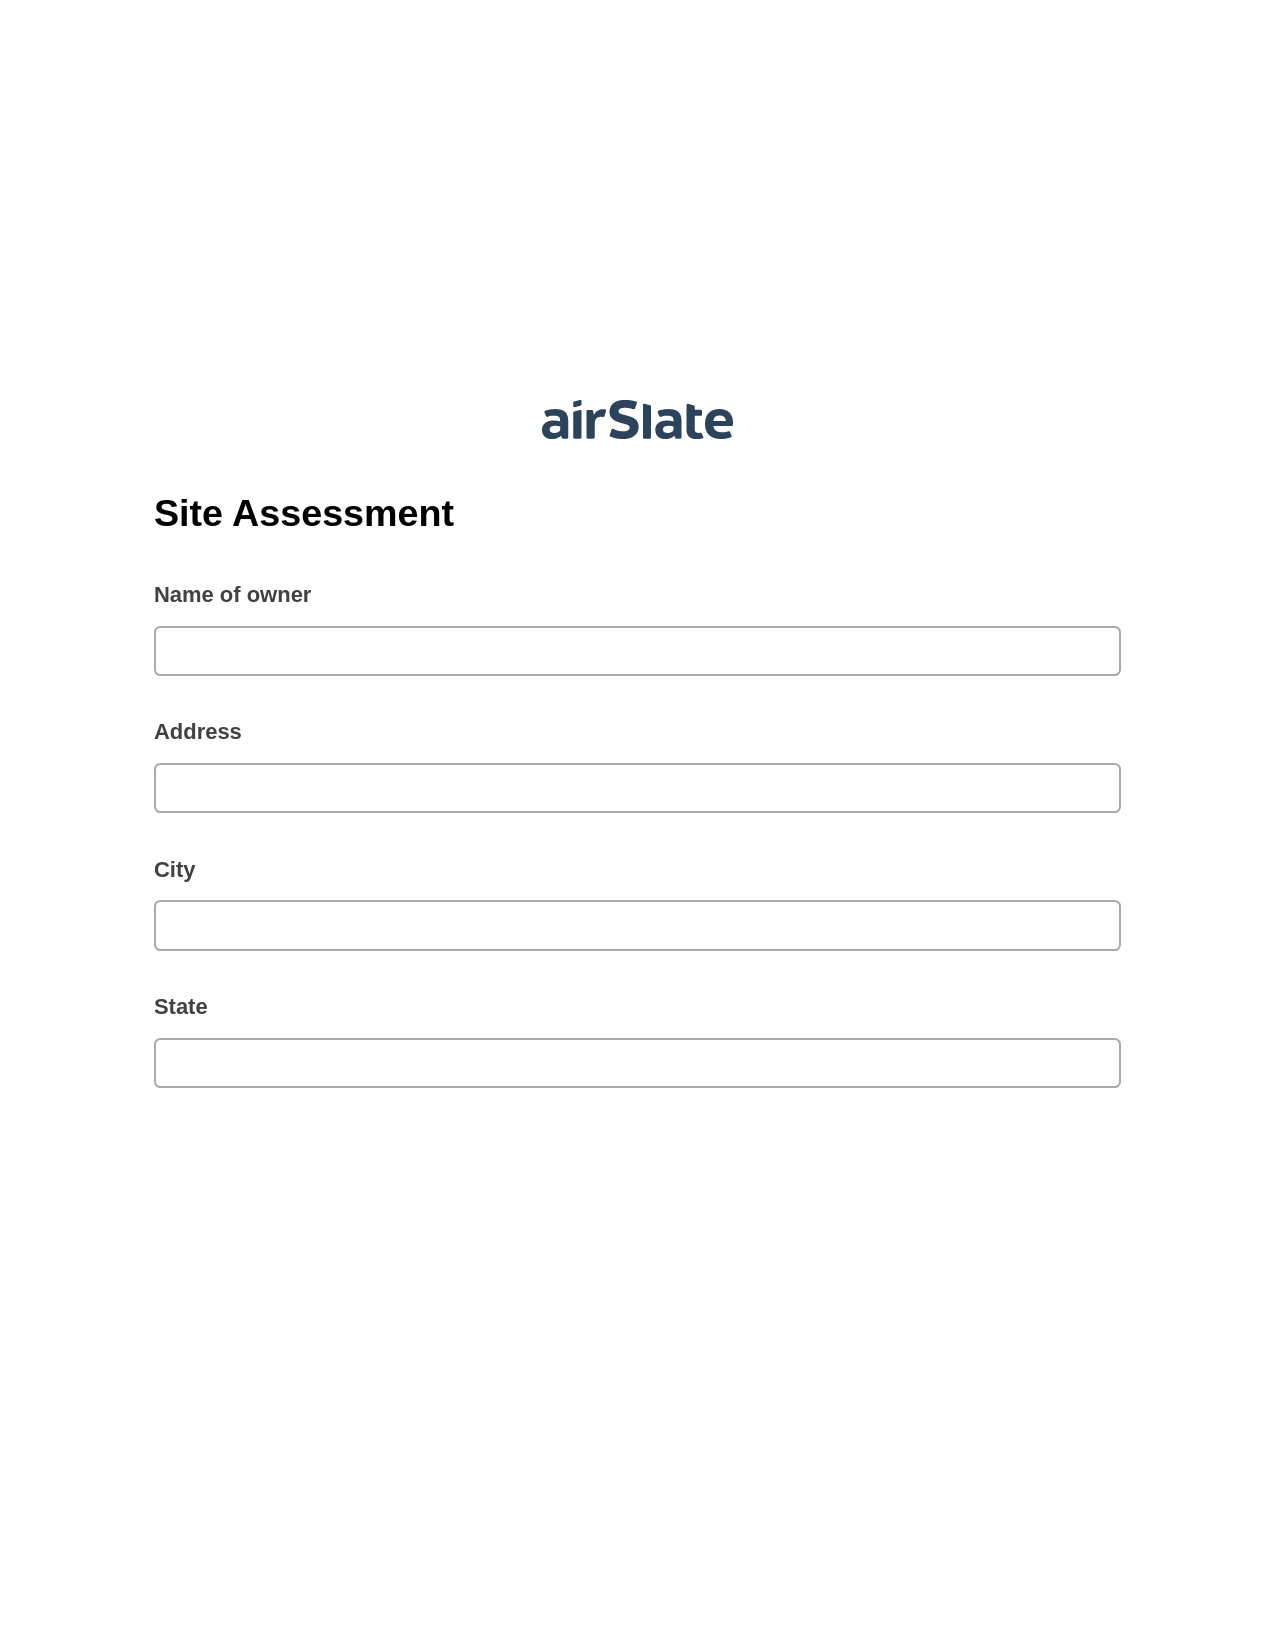 Site Assessment Pre-fill from Excel Spreadsheet Bot, Create MS Dynamics 365 Records Bot, Google Drive Bot